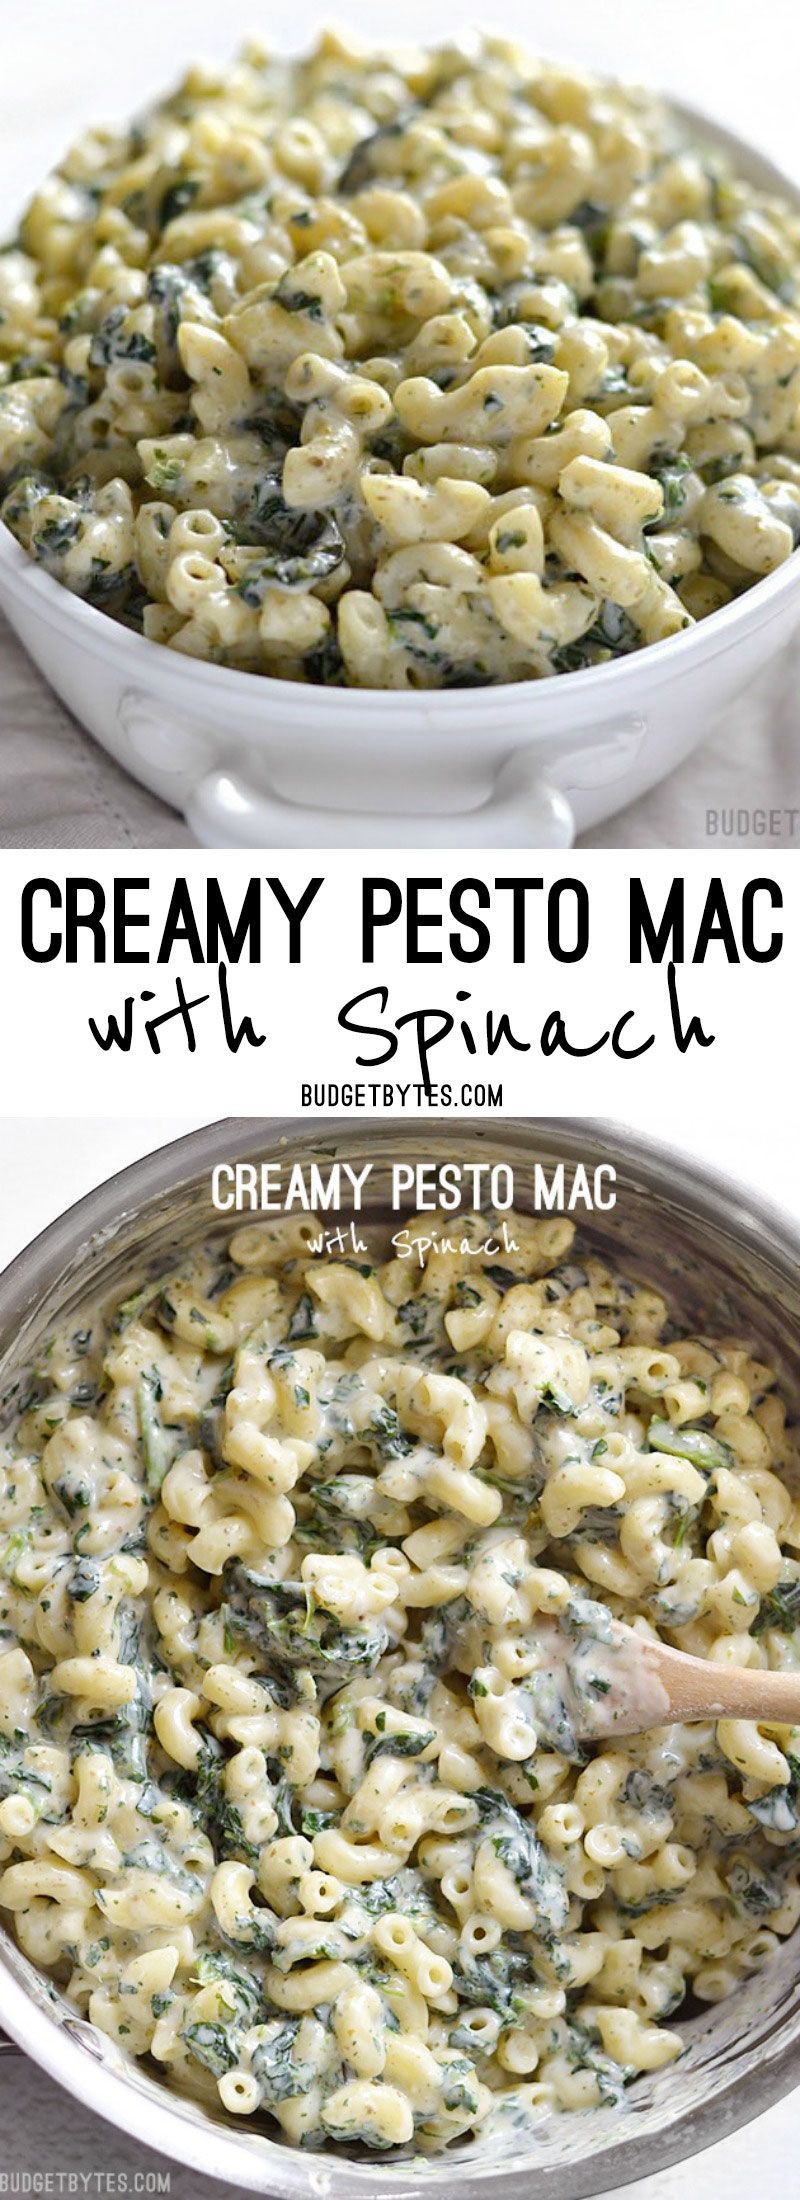 This simple creamy sauce packs huge flavor thanks to a small dollop of basil pesto. Creamy Pesto Mac is creamy comfort with some